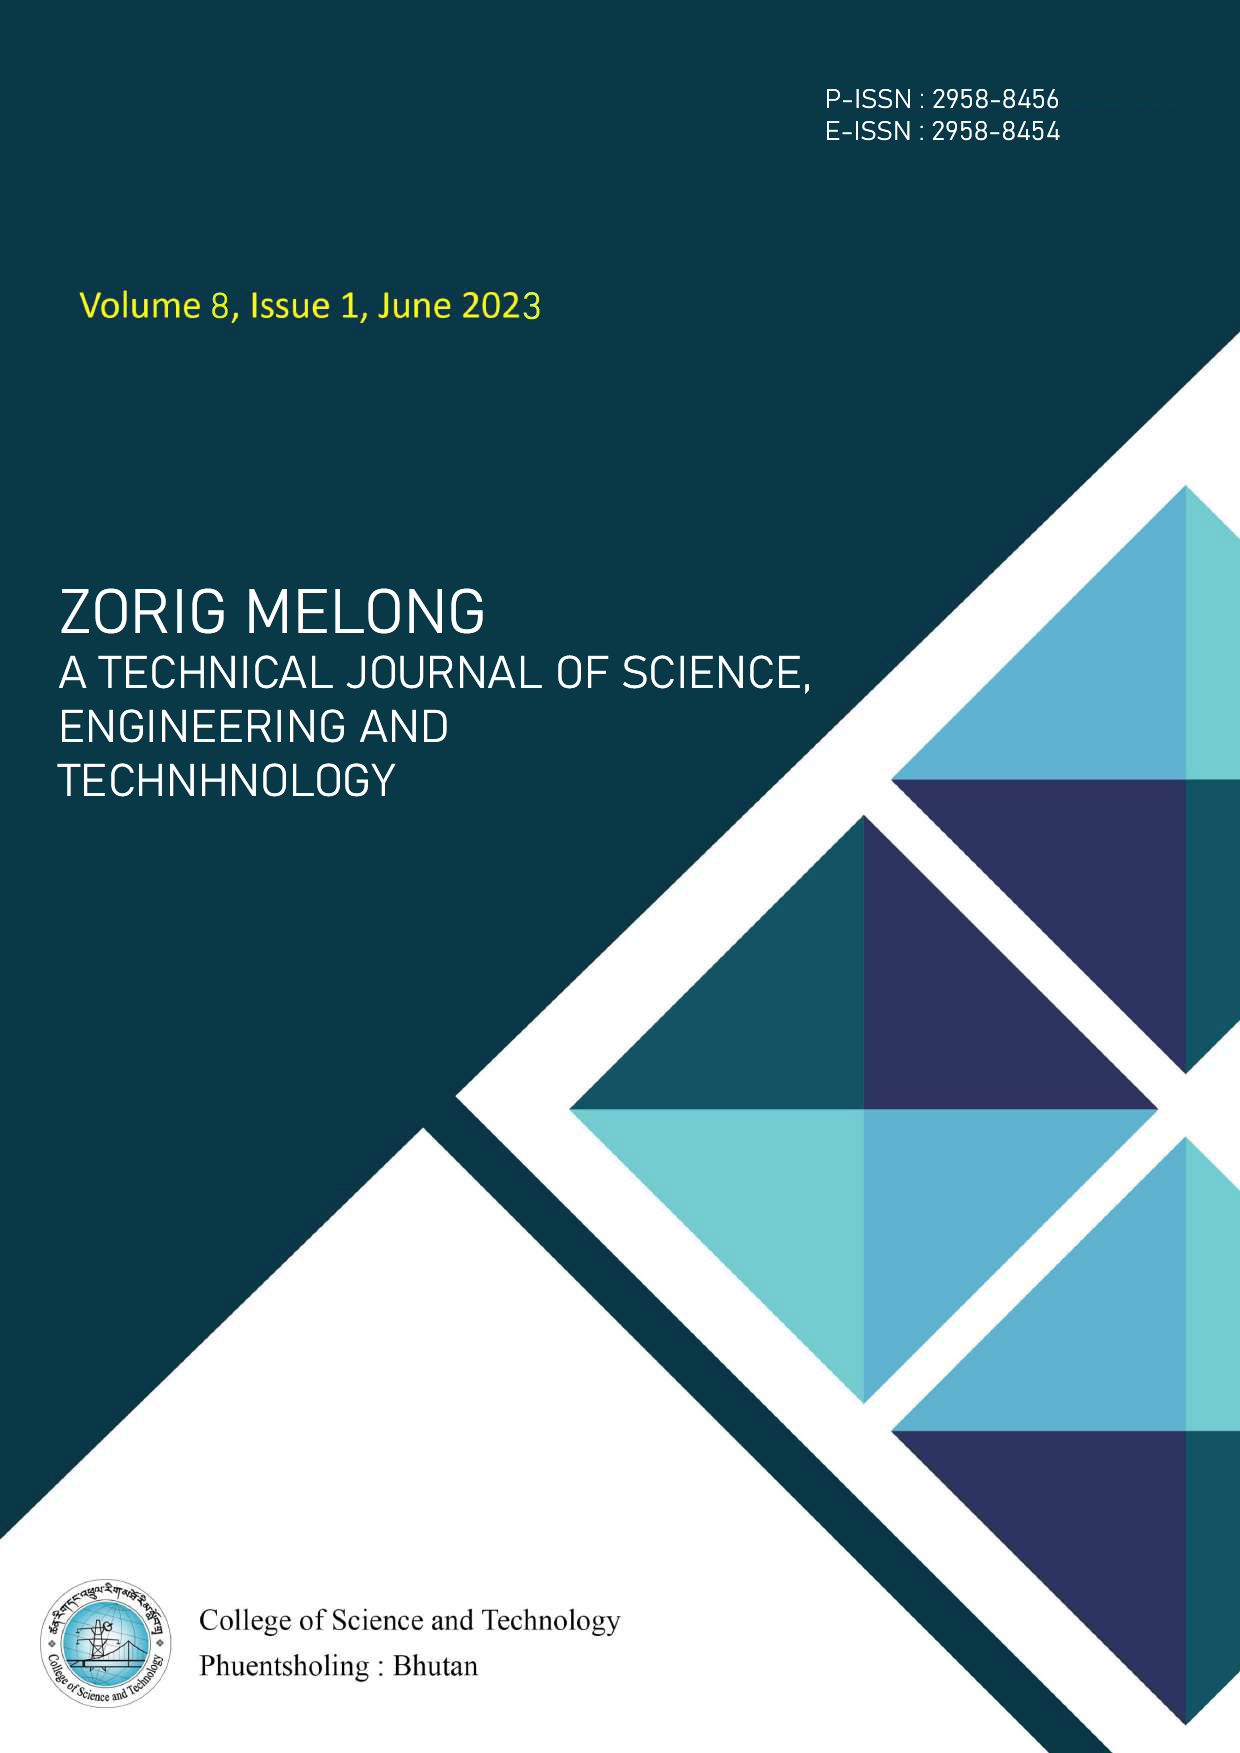 					View Vol. 8 No. 1 (2023): Zorig Melong: A Technical Journal of Science, Engineering and Technology
				